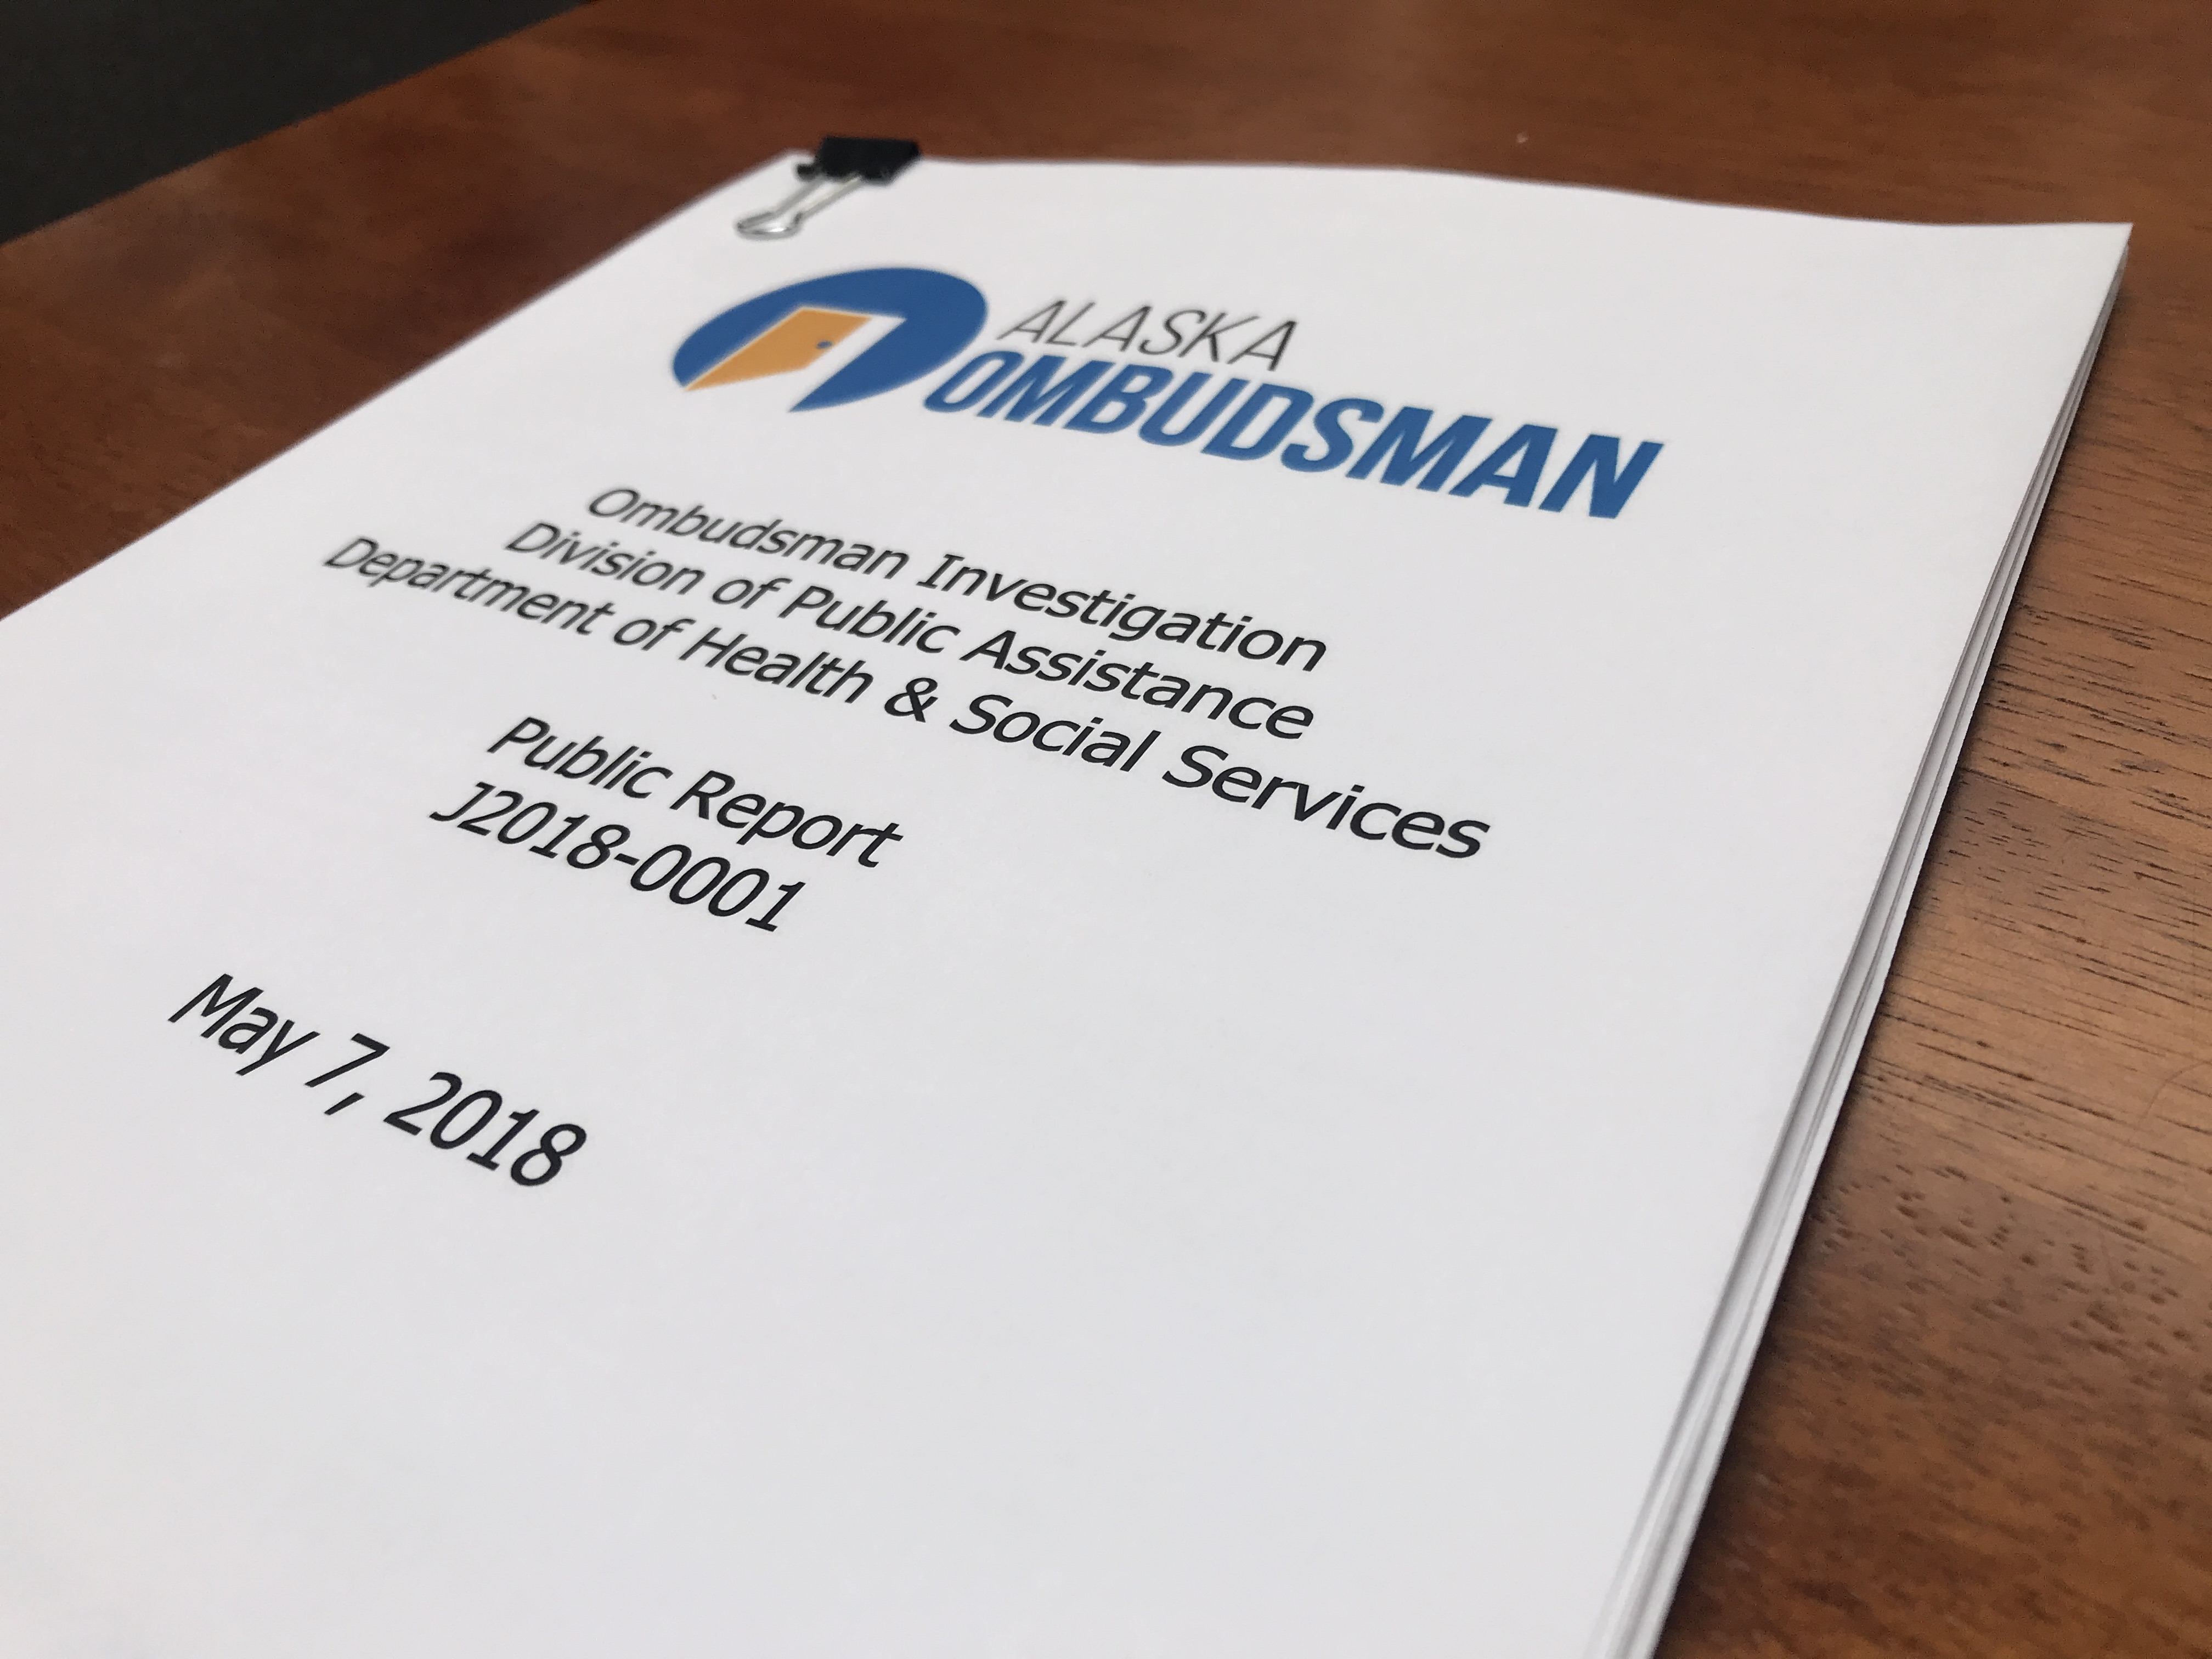 Among other recommendations, the 26-page Alaska Ombudsman’s report released Monday says “additional staff is critical to addressing (the Division of Public Assistance) backlog and lack of communications capacity.” (Photo by Casey Grove/Alaska Public Media)